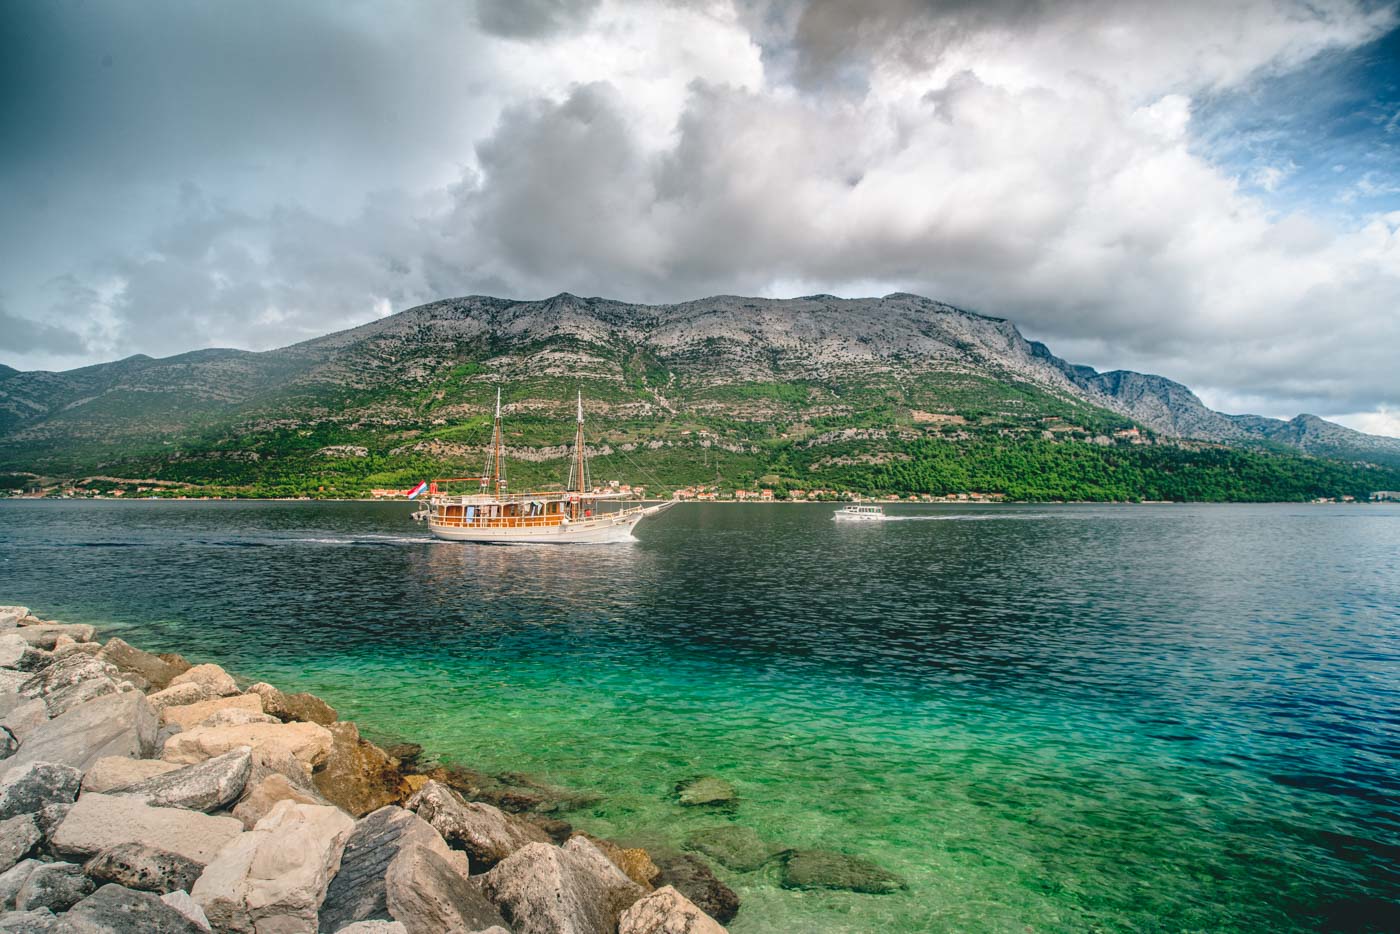 21 Photos That Will Make You Want to Visit Croatia